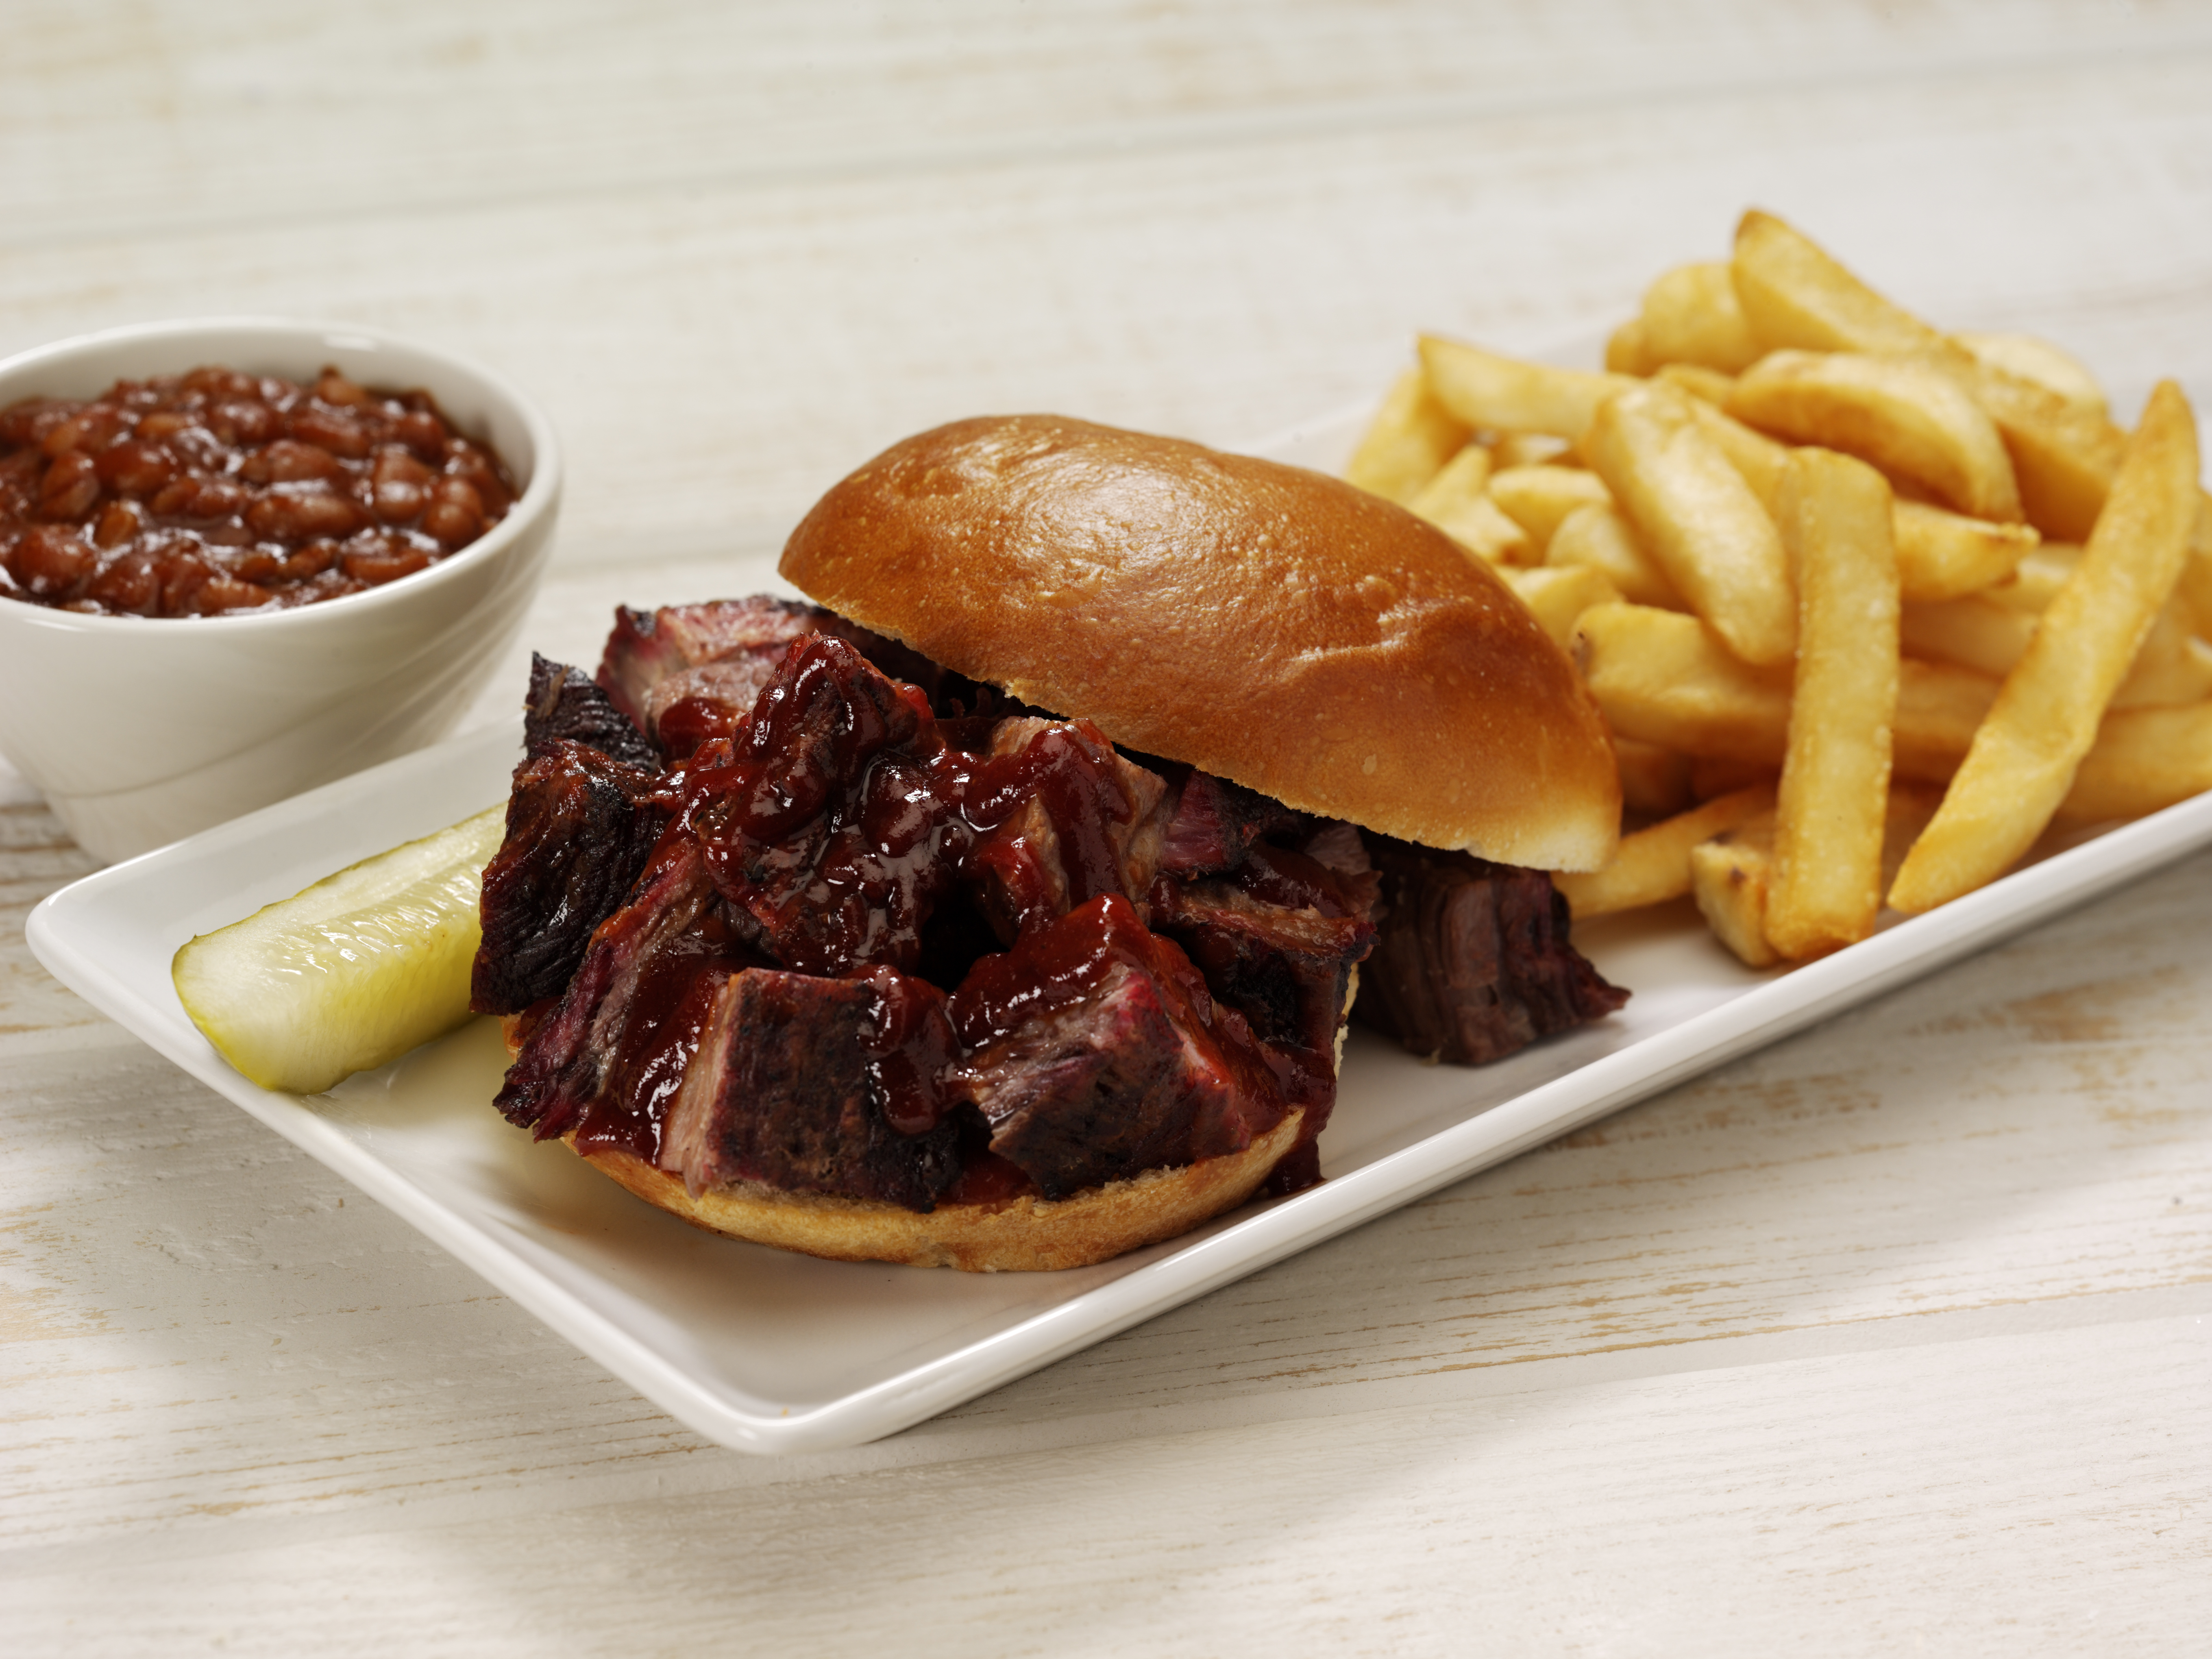 Ltd-Reserve-Burnt-Ends-sandwich-with-fries-and-beans